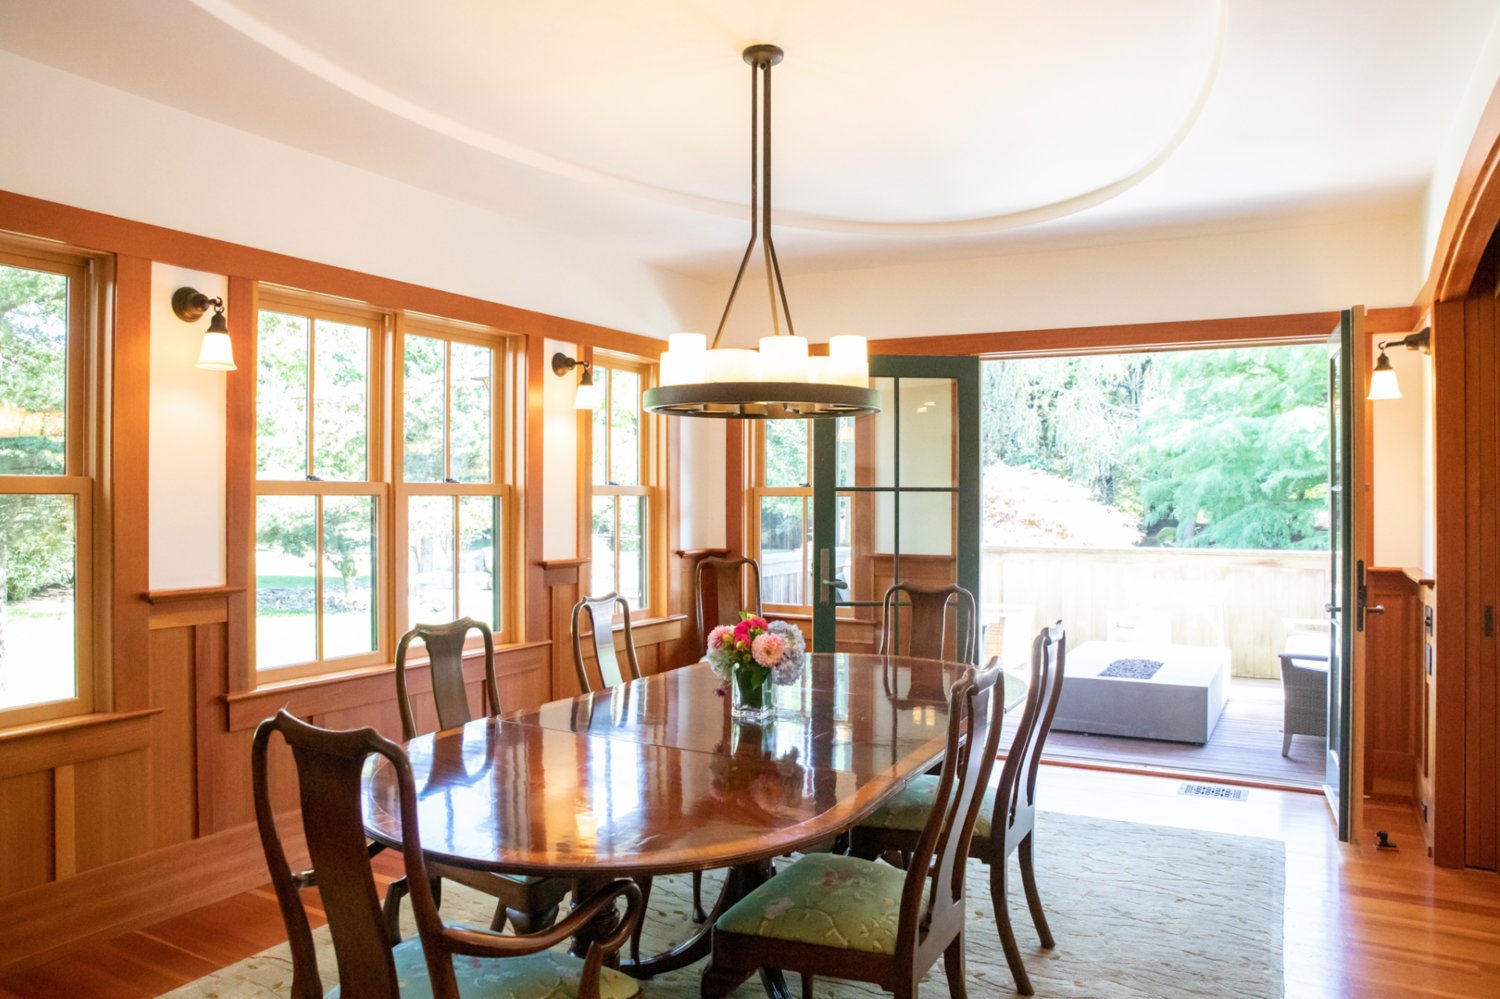 The dining room has multiple windows and access to the private porch with an electric fire pit.